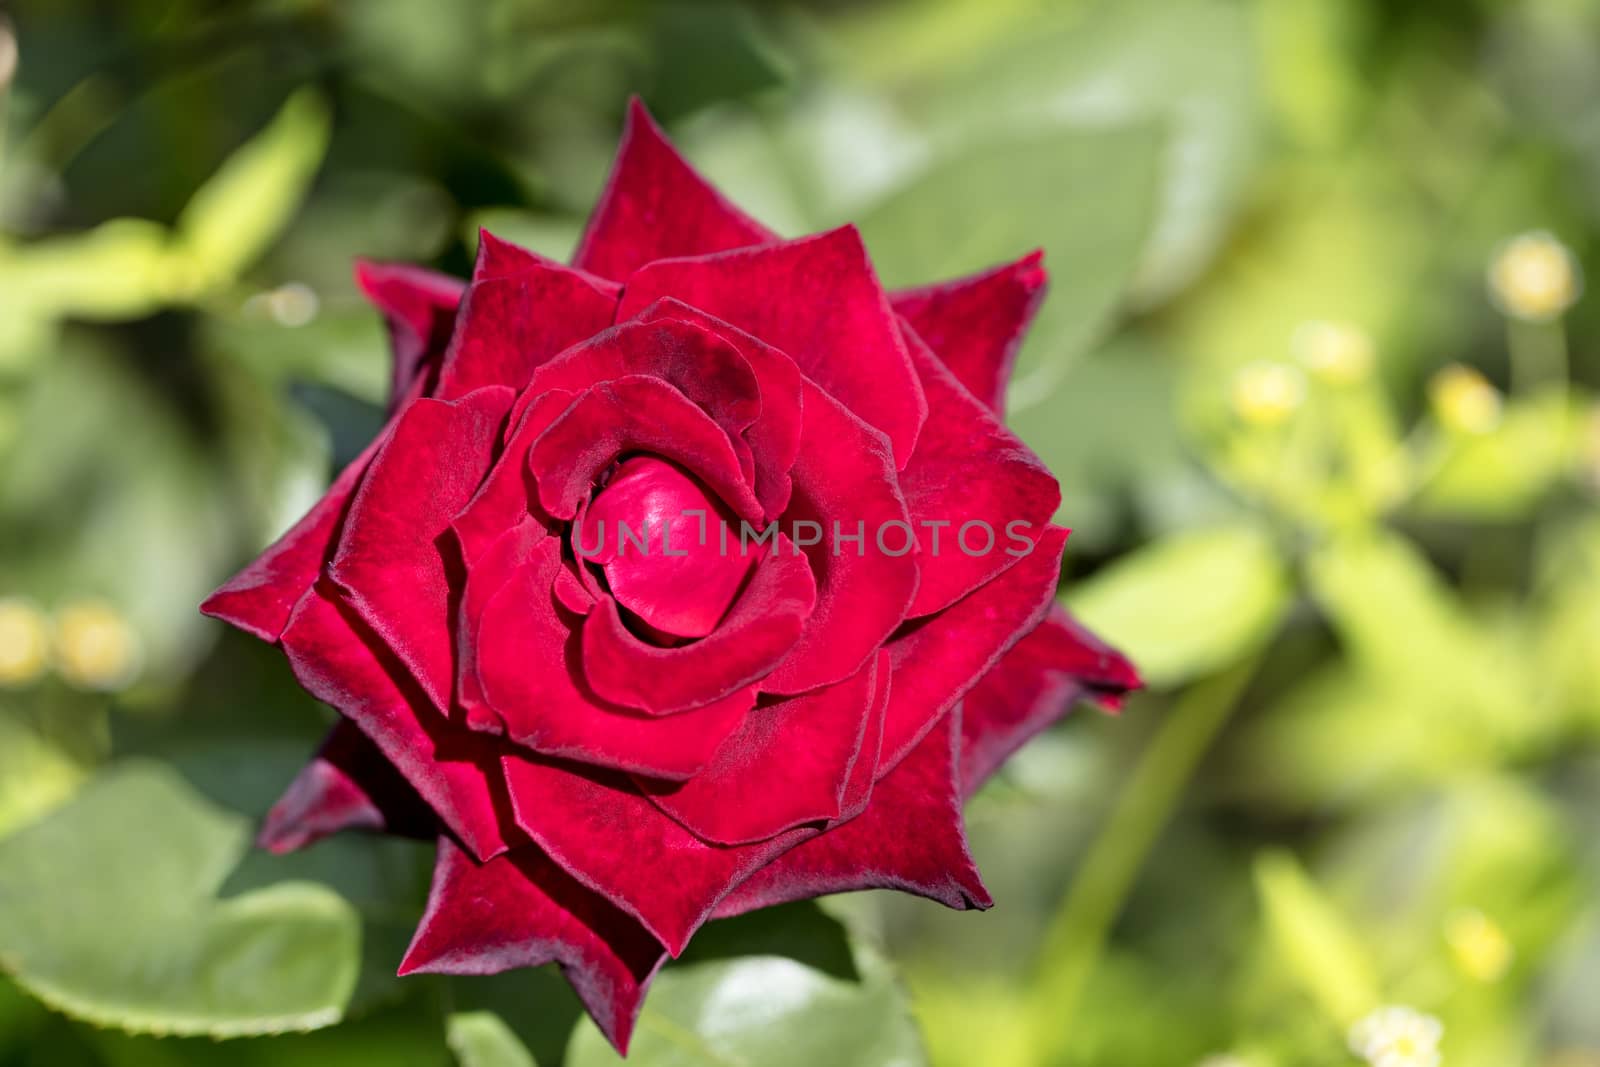 A blooming bright red rose flower on a green background